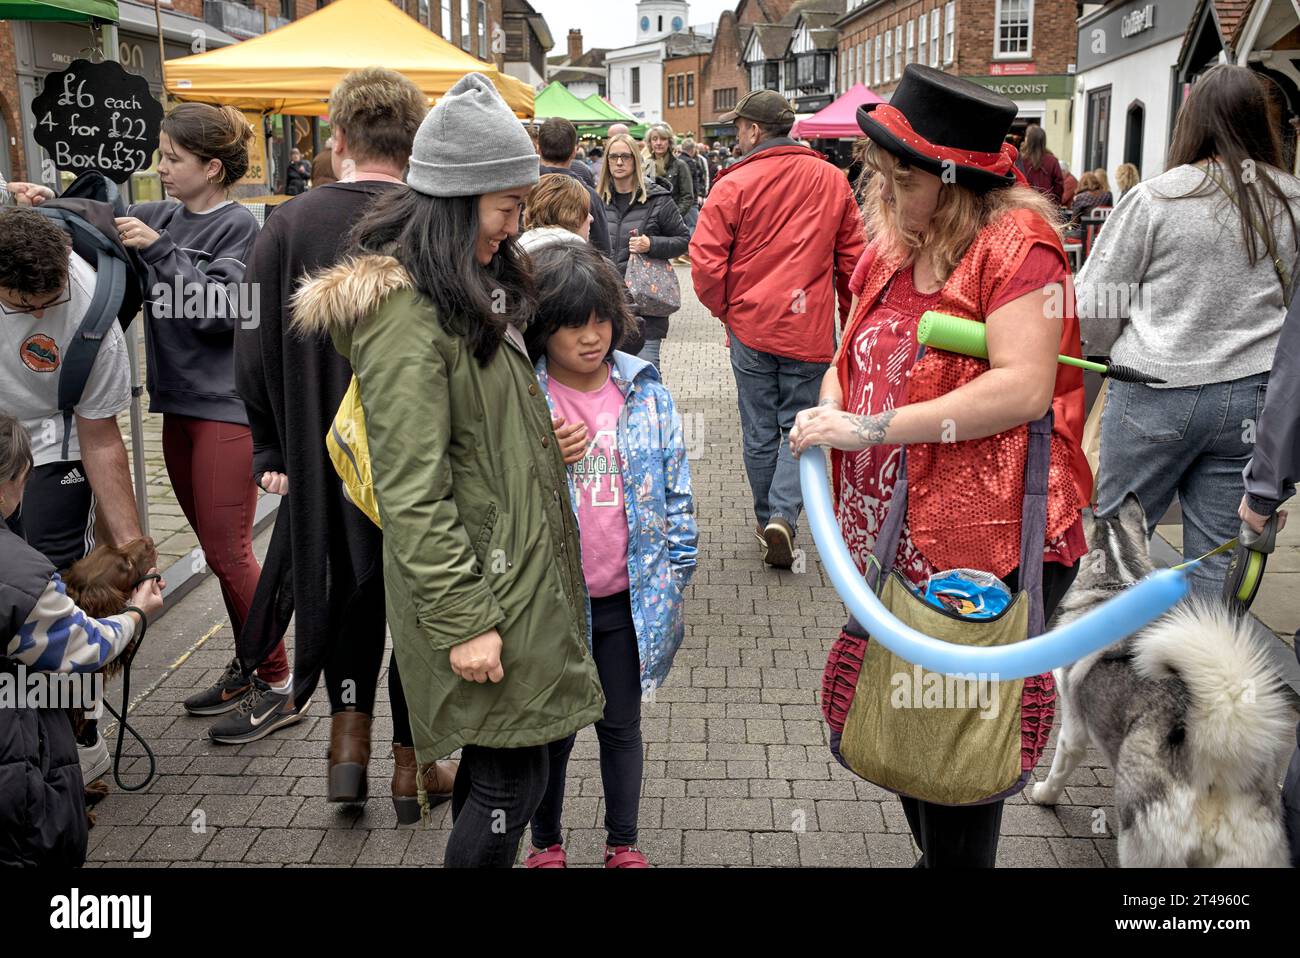 Female street entertainer shaping a balloon for an Asian mother and child. England UK Stock Photo